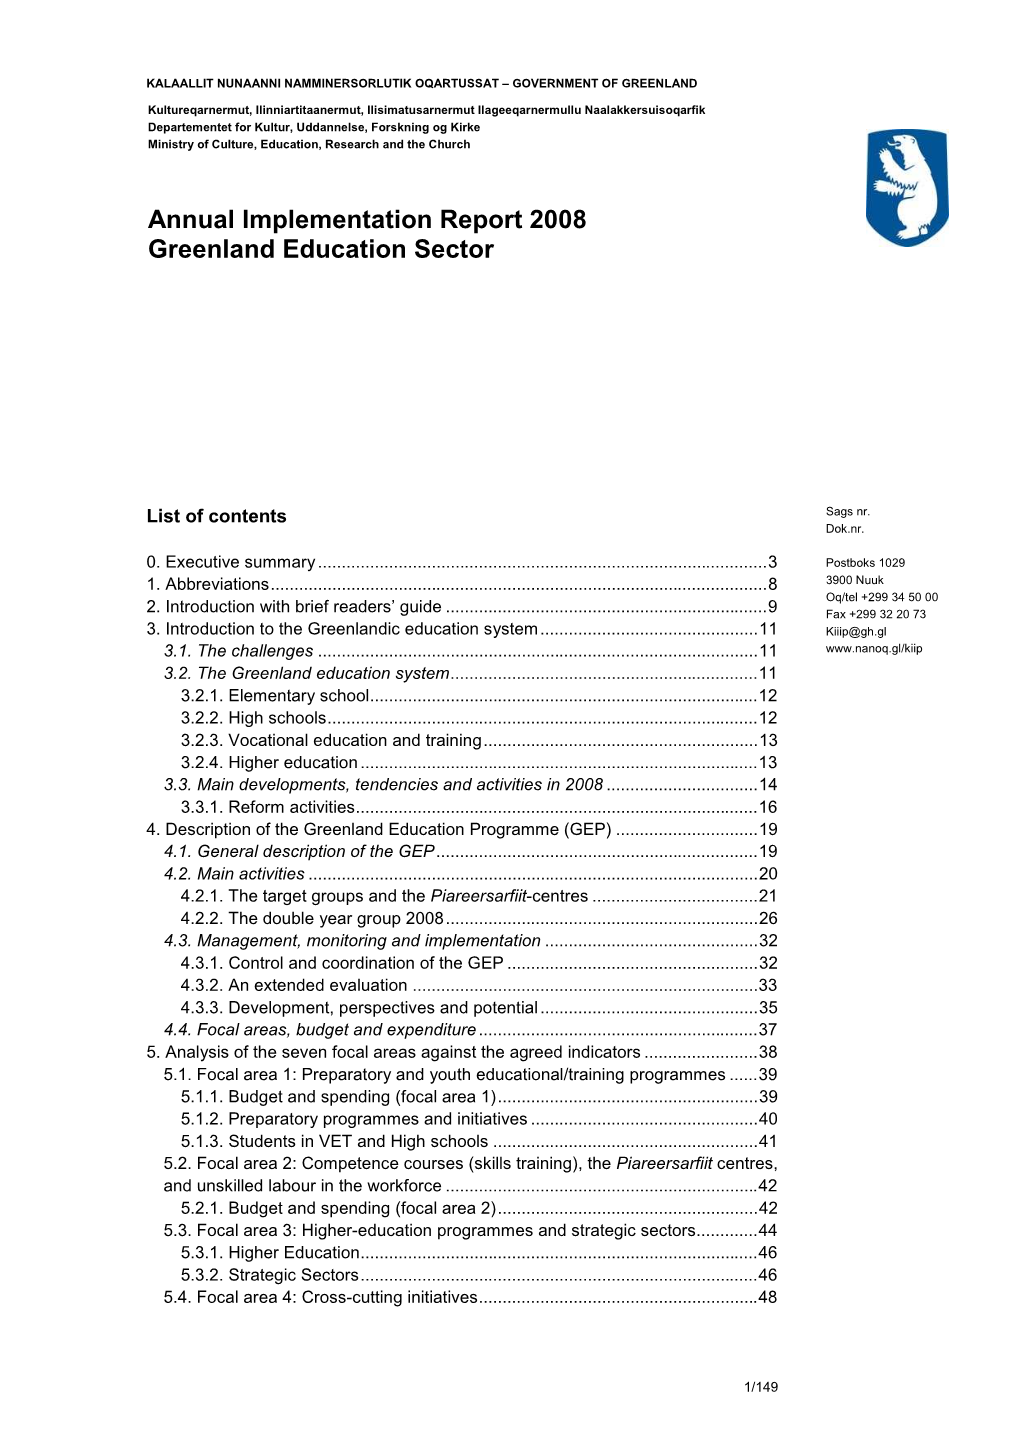 Annual Implementation Report 2008 Greenland Education Sector